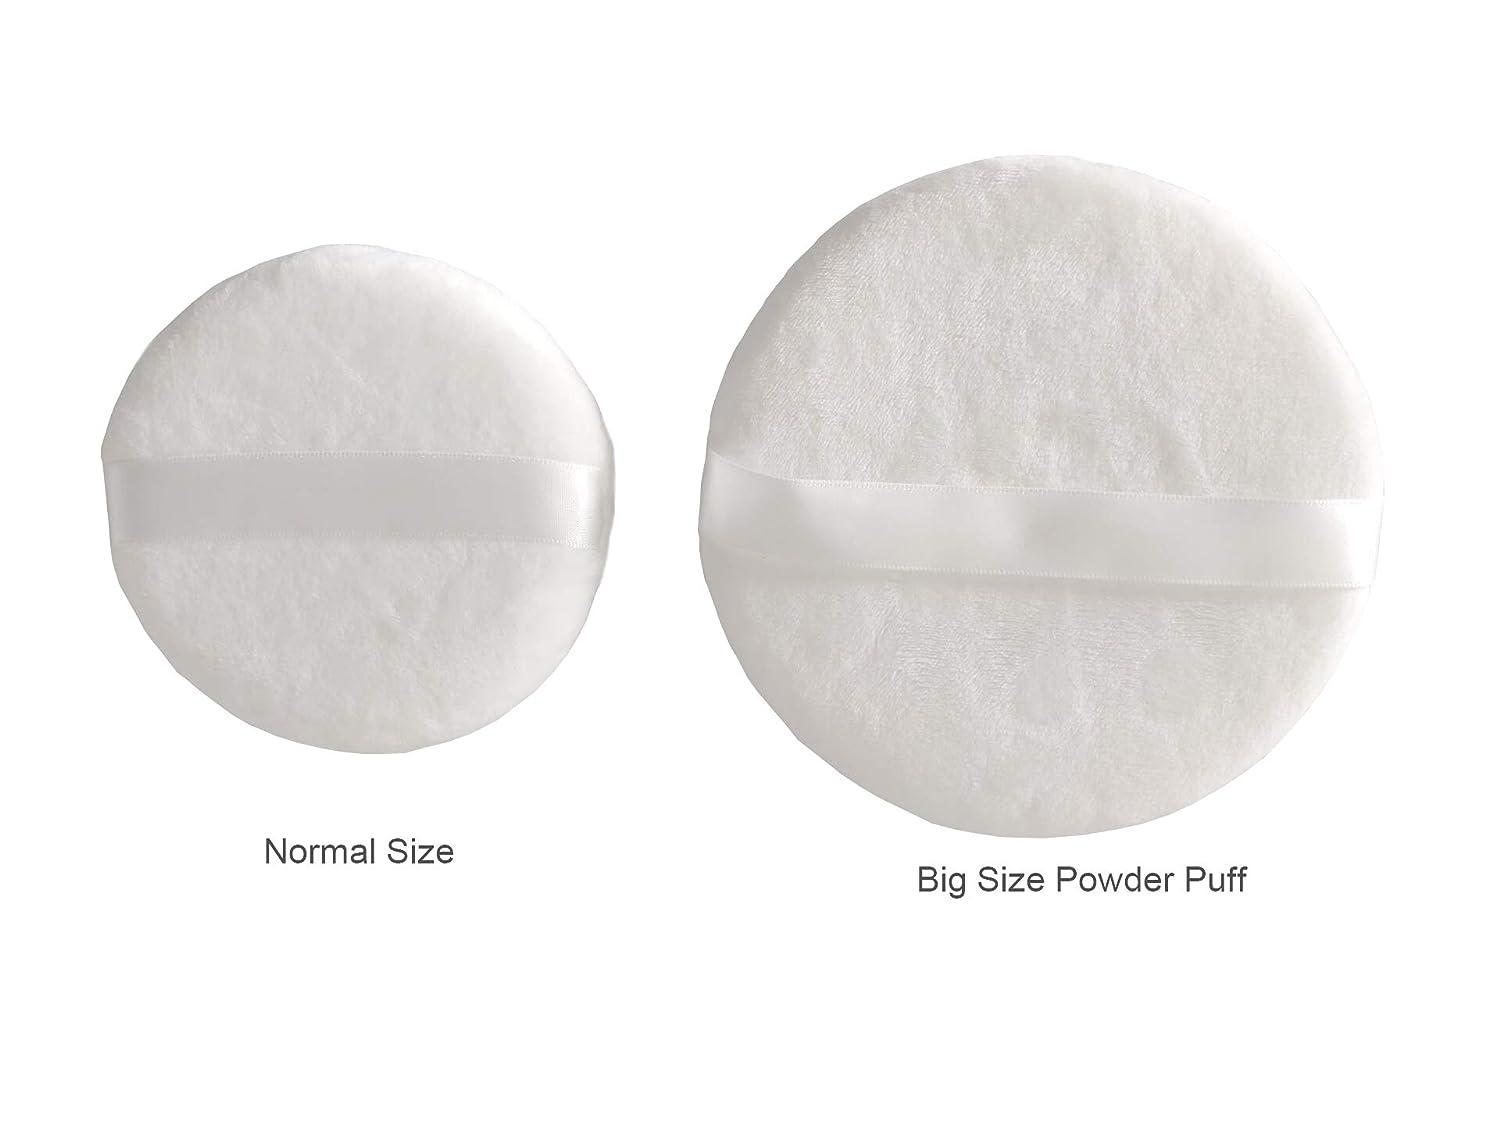 Topwon Powder Puff for Body Baby - 5 Inch - Extra Large Jumbo Size Use for Dusting  Powder or Blending & Setting Makeup Foundation (3 Pieces)